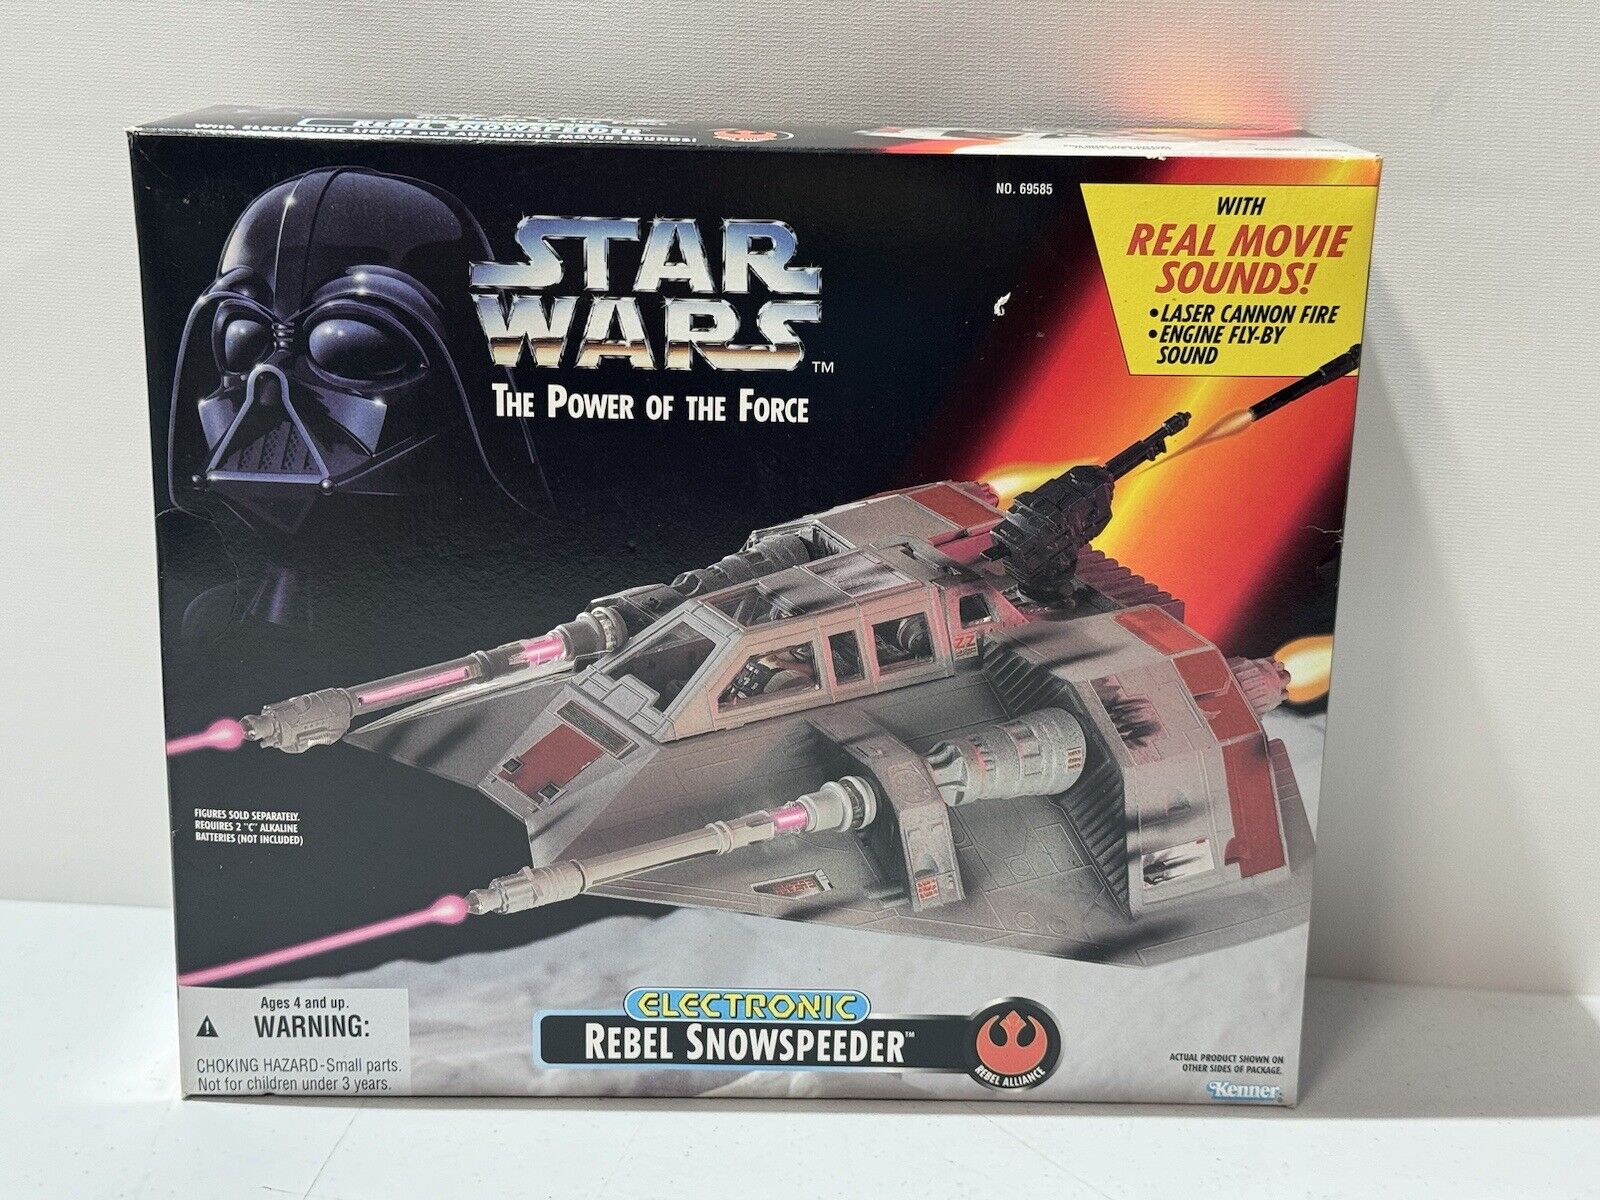 Vgt STAR WARS Rebel Snowspeeder  Power of the Force Kenner electronic NEW 1995